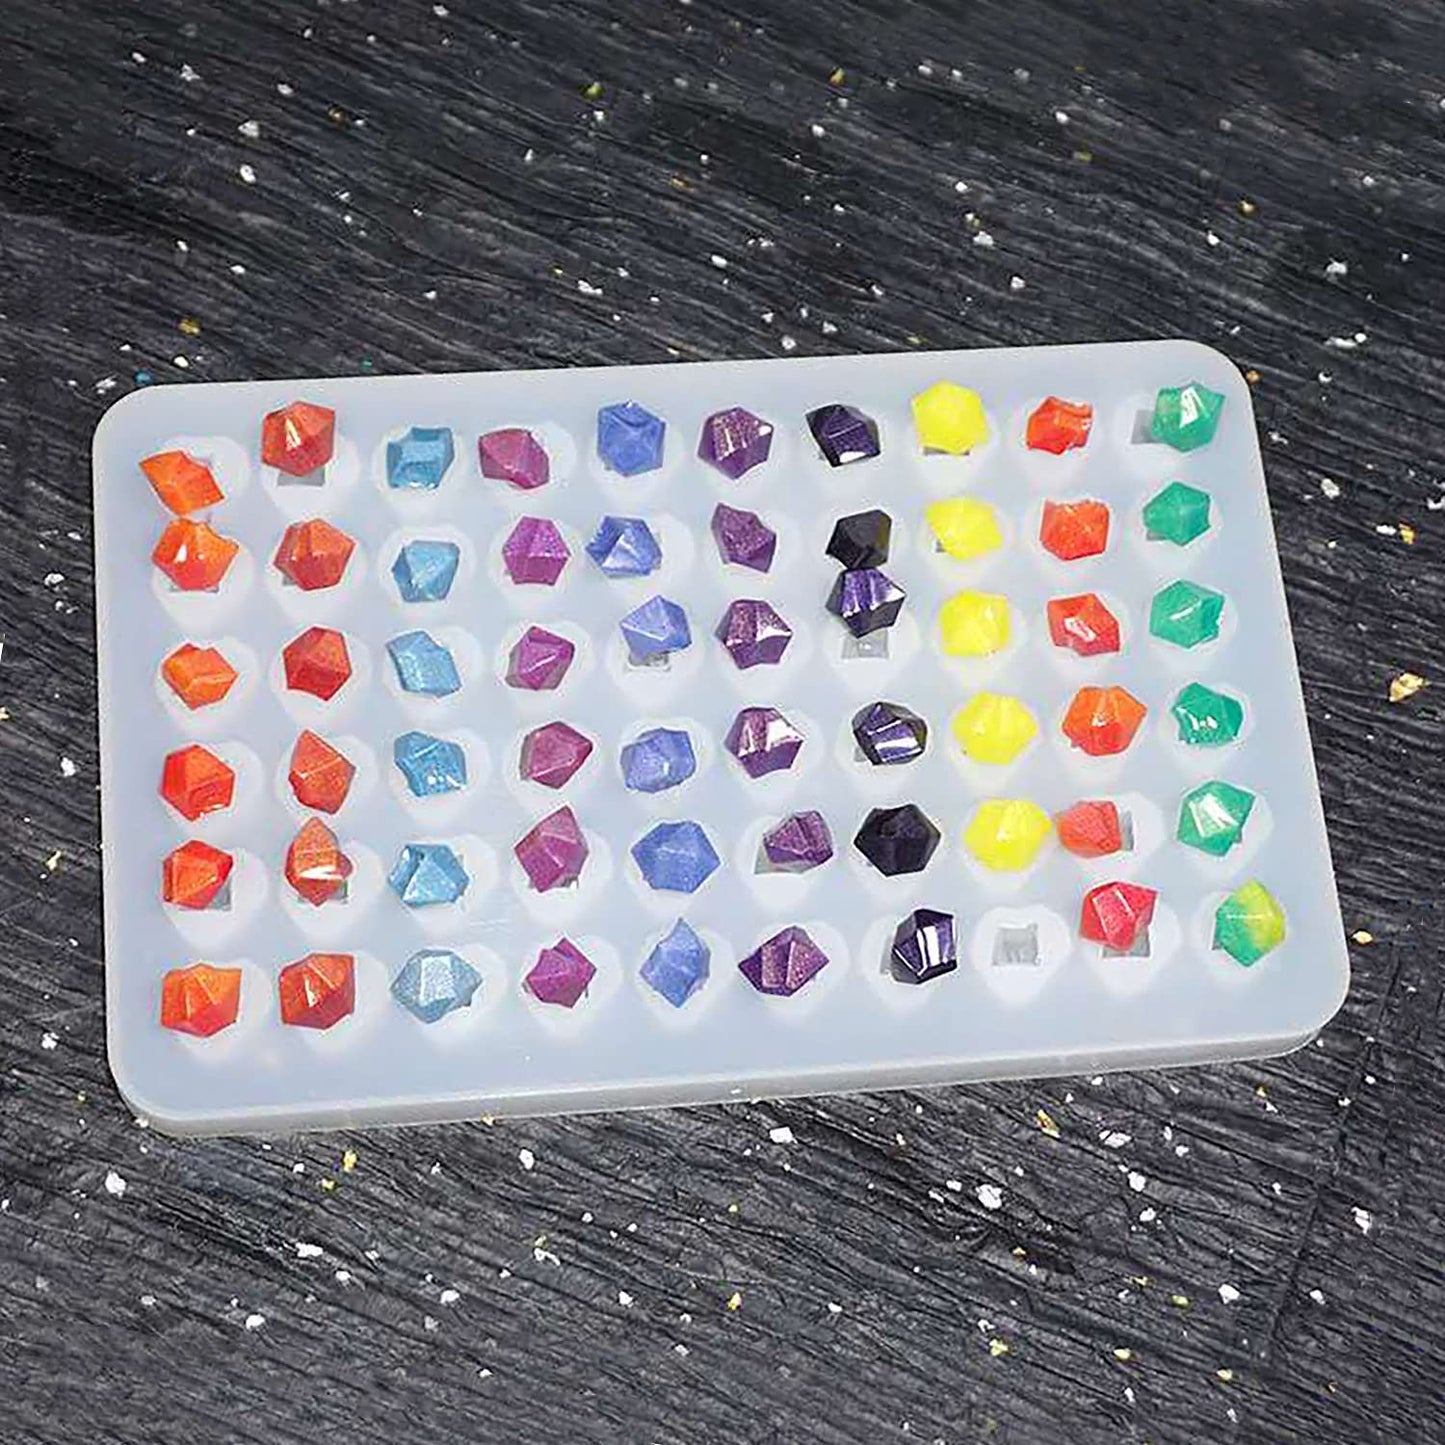 Resin Craft Makes 60 Crystals Small Crystal Stones Silicone Mold for R –  IntoResin